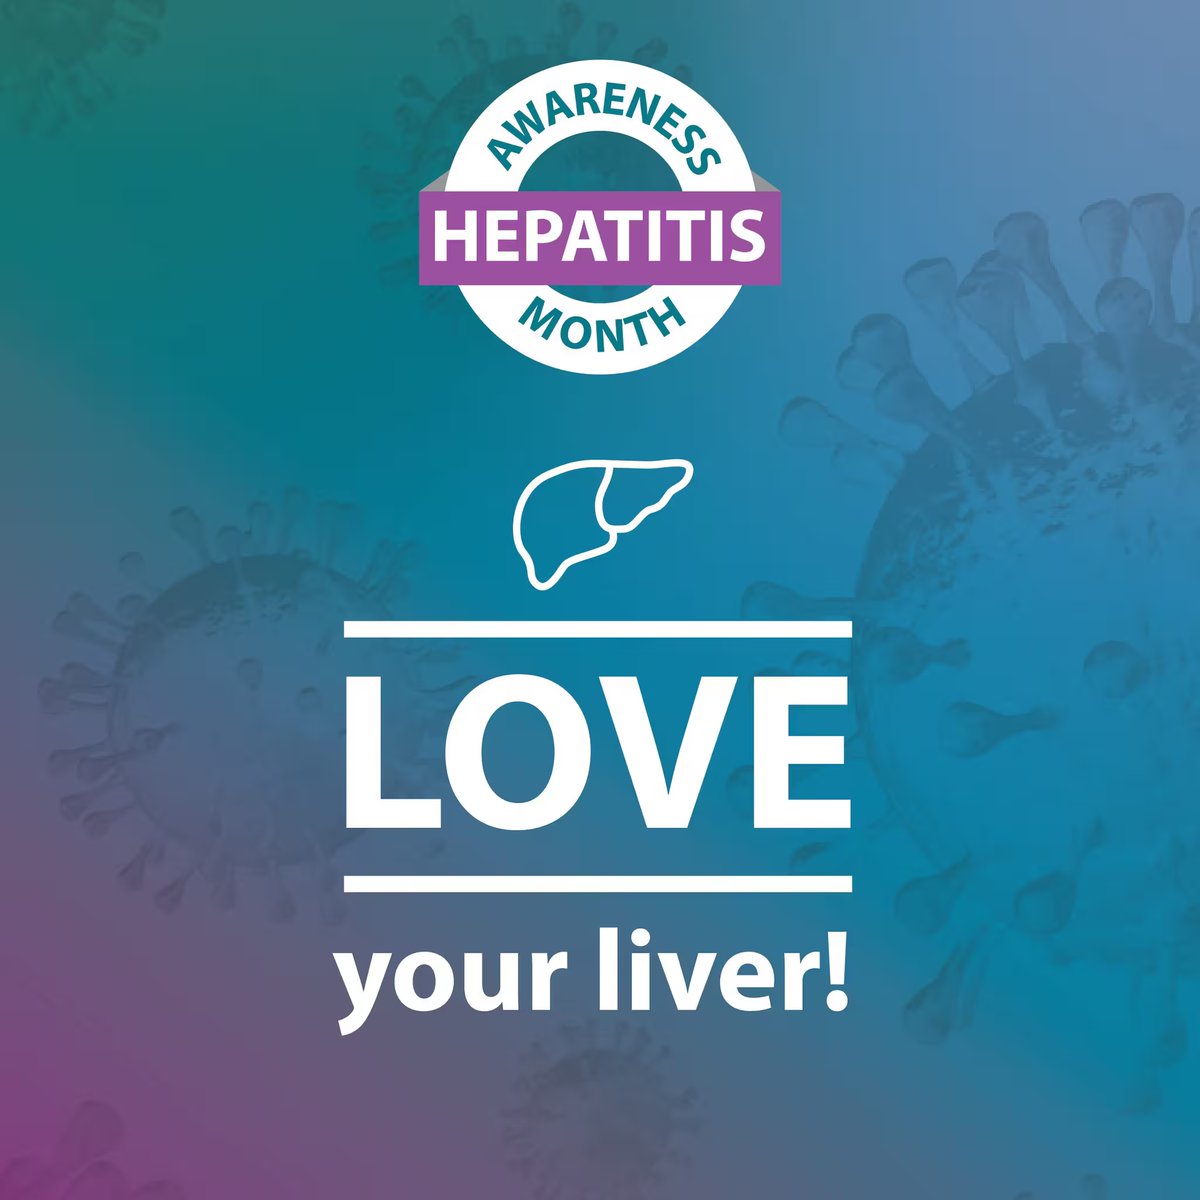 Left untreated, hepatitis B and hepatitis C can damage your liver and even lead to liver cancer. This #HepatitisAwarenessMonth, learn more about prevention, testing and treatment. bit.ly/4aMFGdA